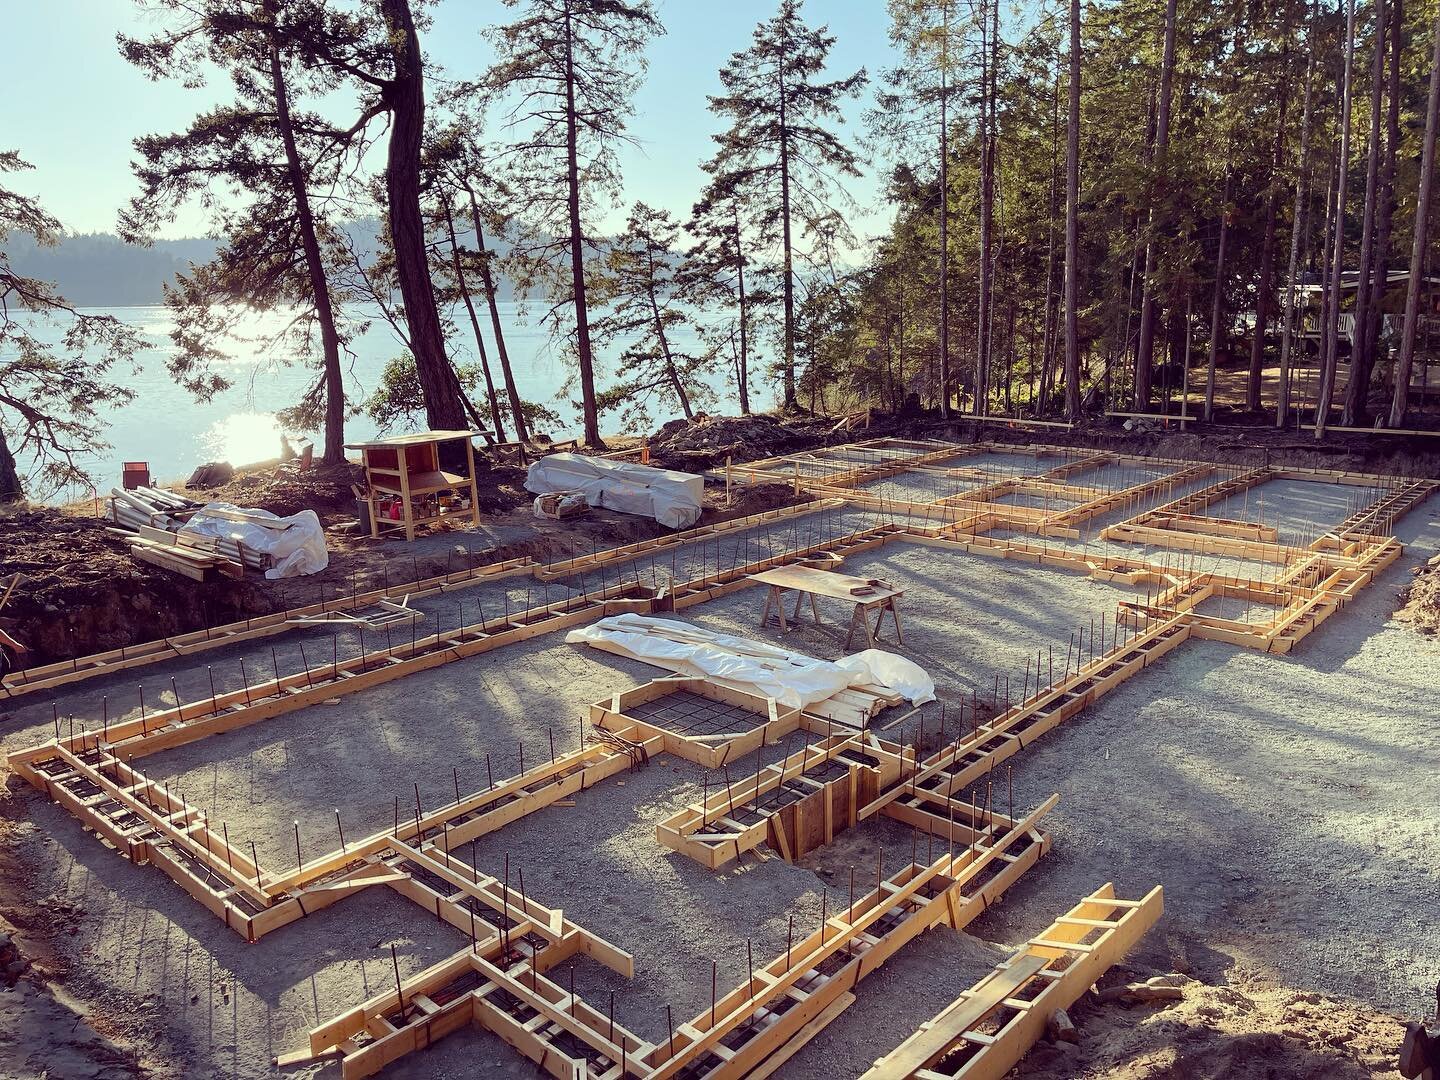 Golden Hour, Mayne Island. Sick rancher now under construction.
Footings in October are much more enjoyable then we remember ☀️. #modernarchitecture #modernhomes #architecture #customhomes #mayneisland #builder